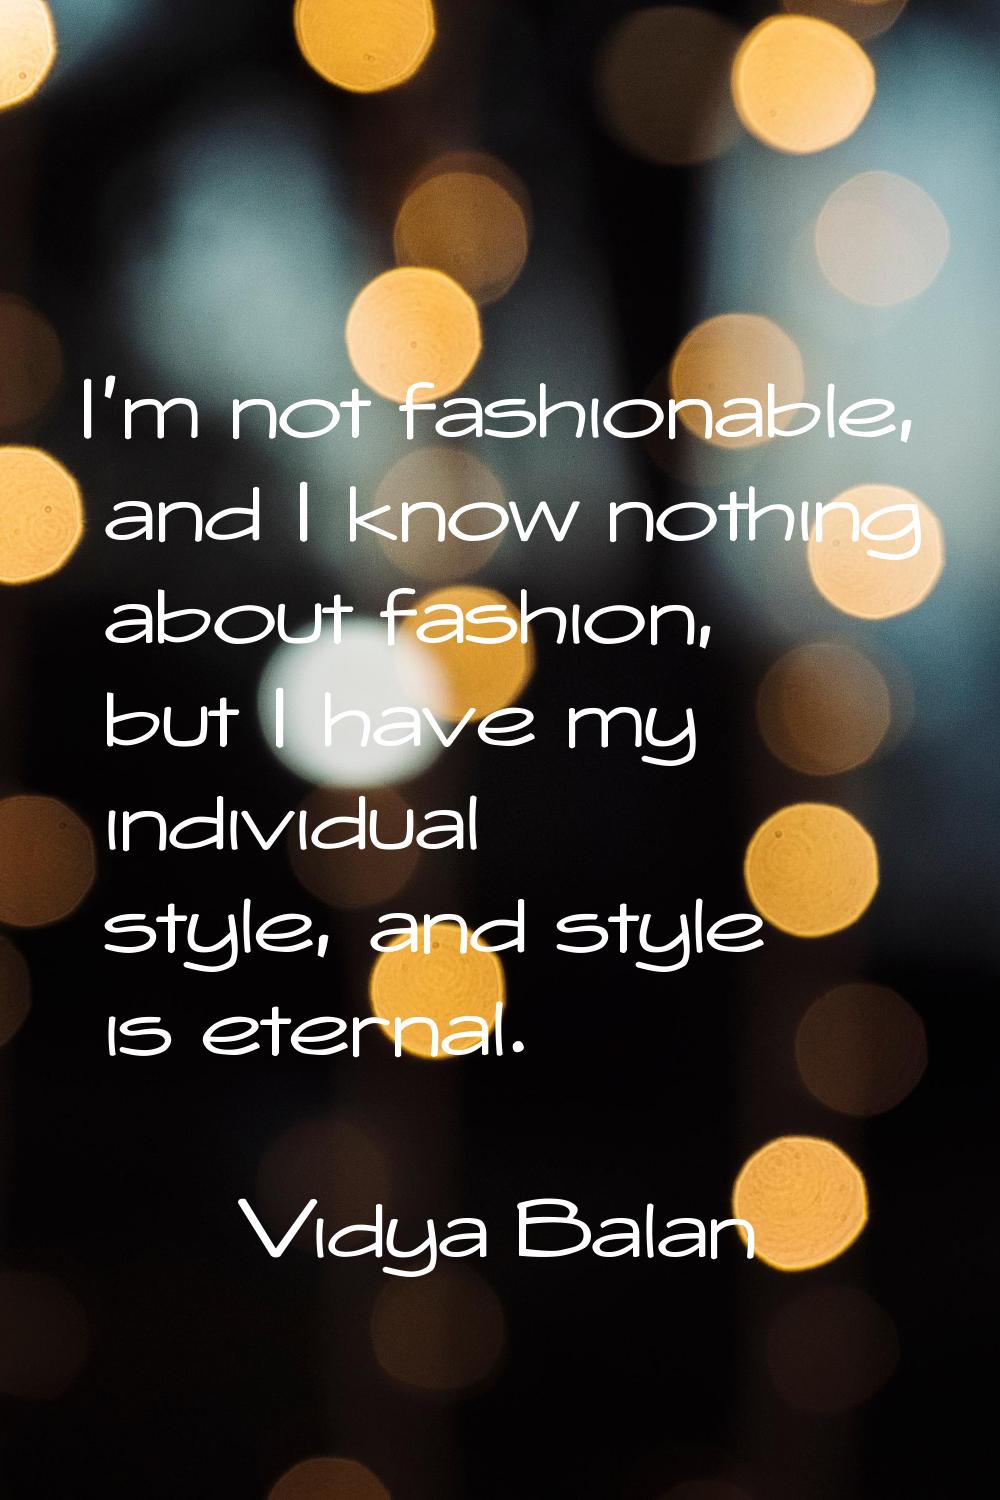 I'm not fashionable, and I know nothing about fashion, but I have my individual style, and style is